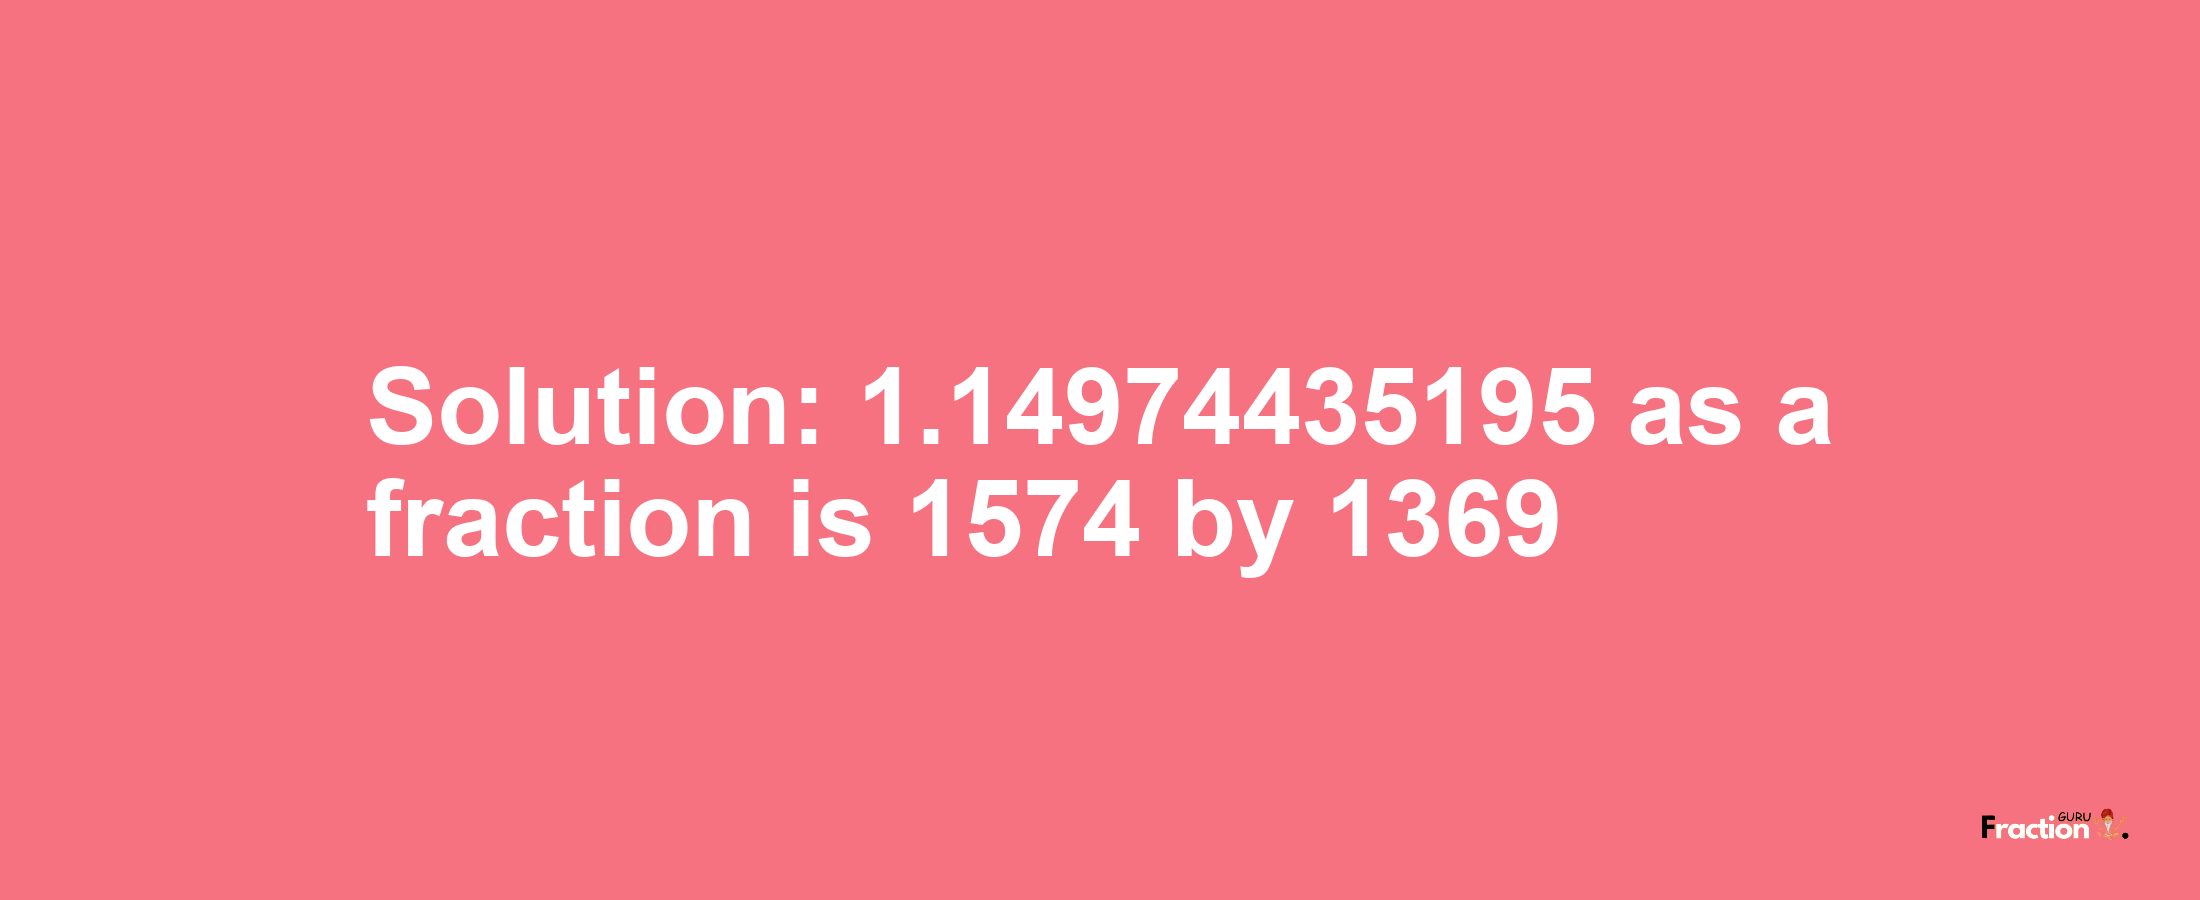 Solution:1.14974435195 as a fraction is 1574/1369